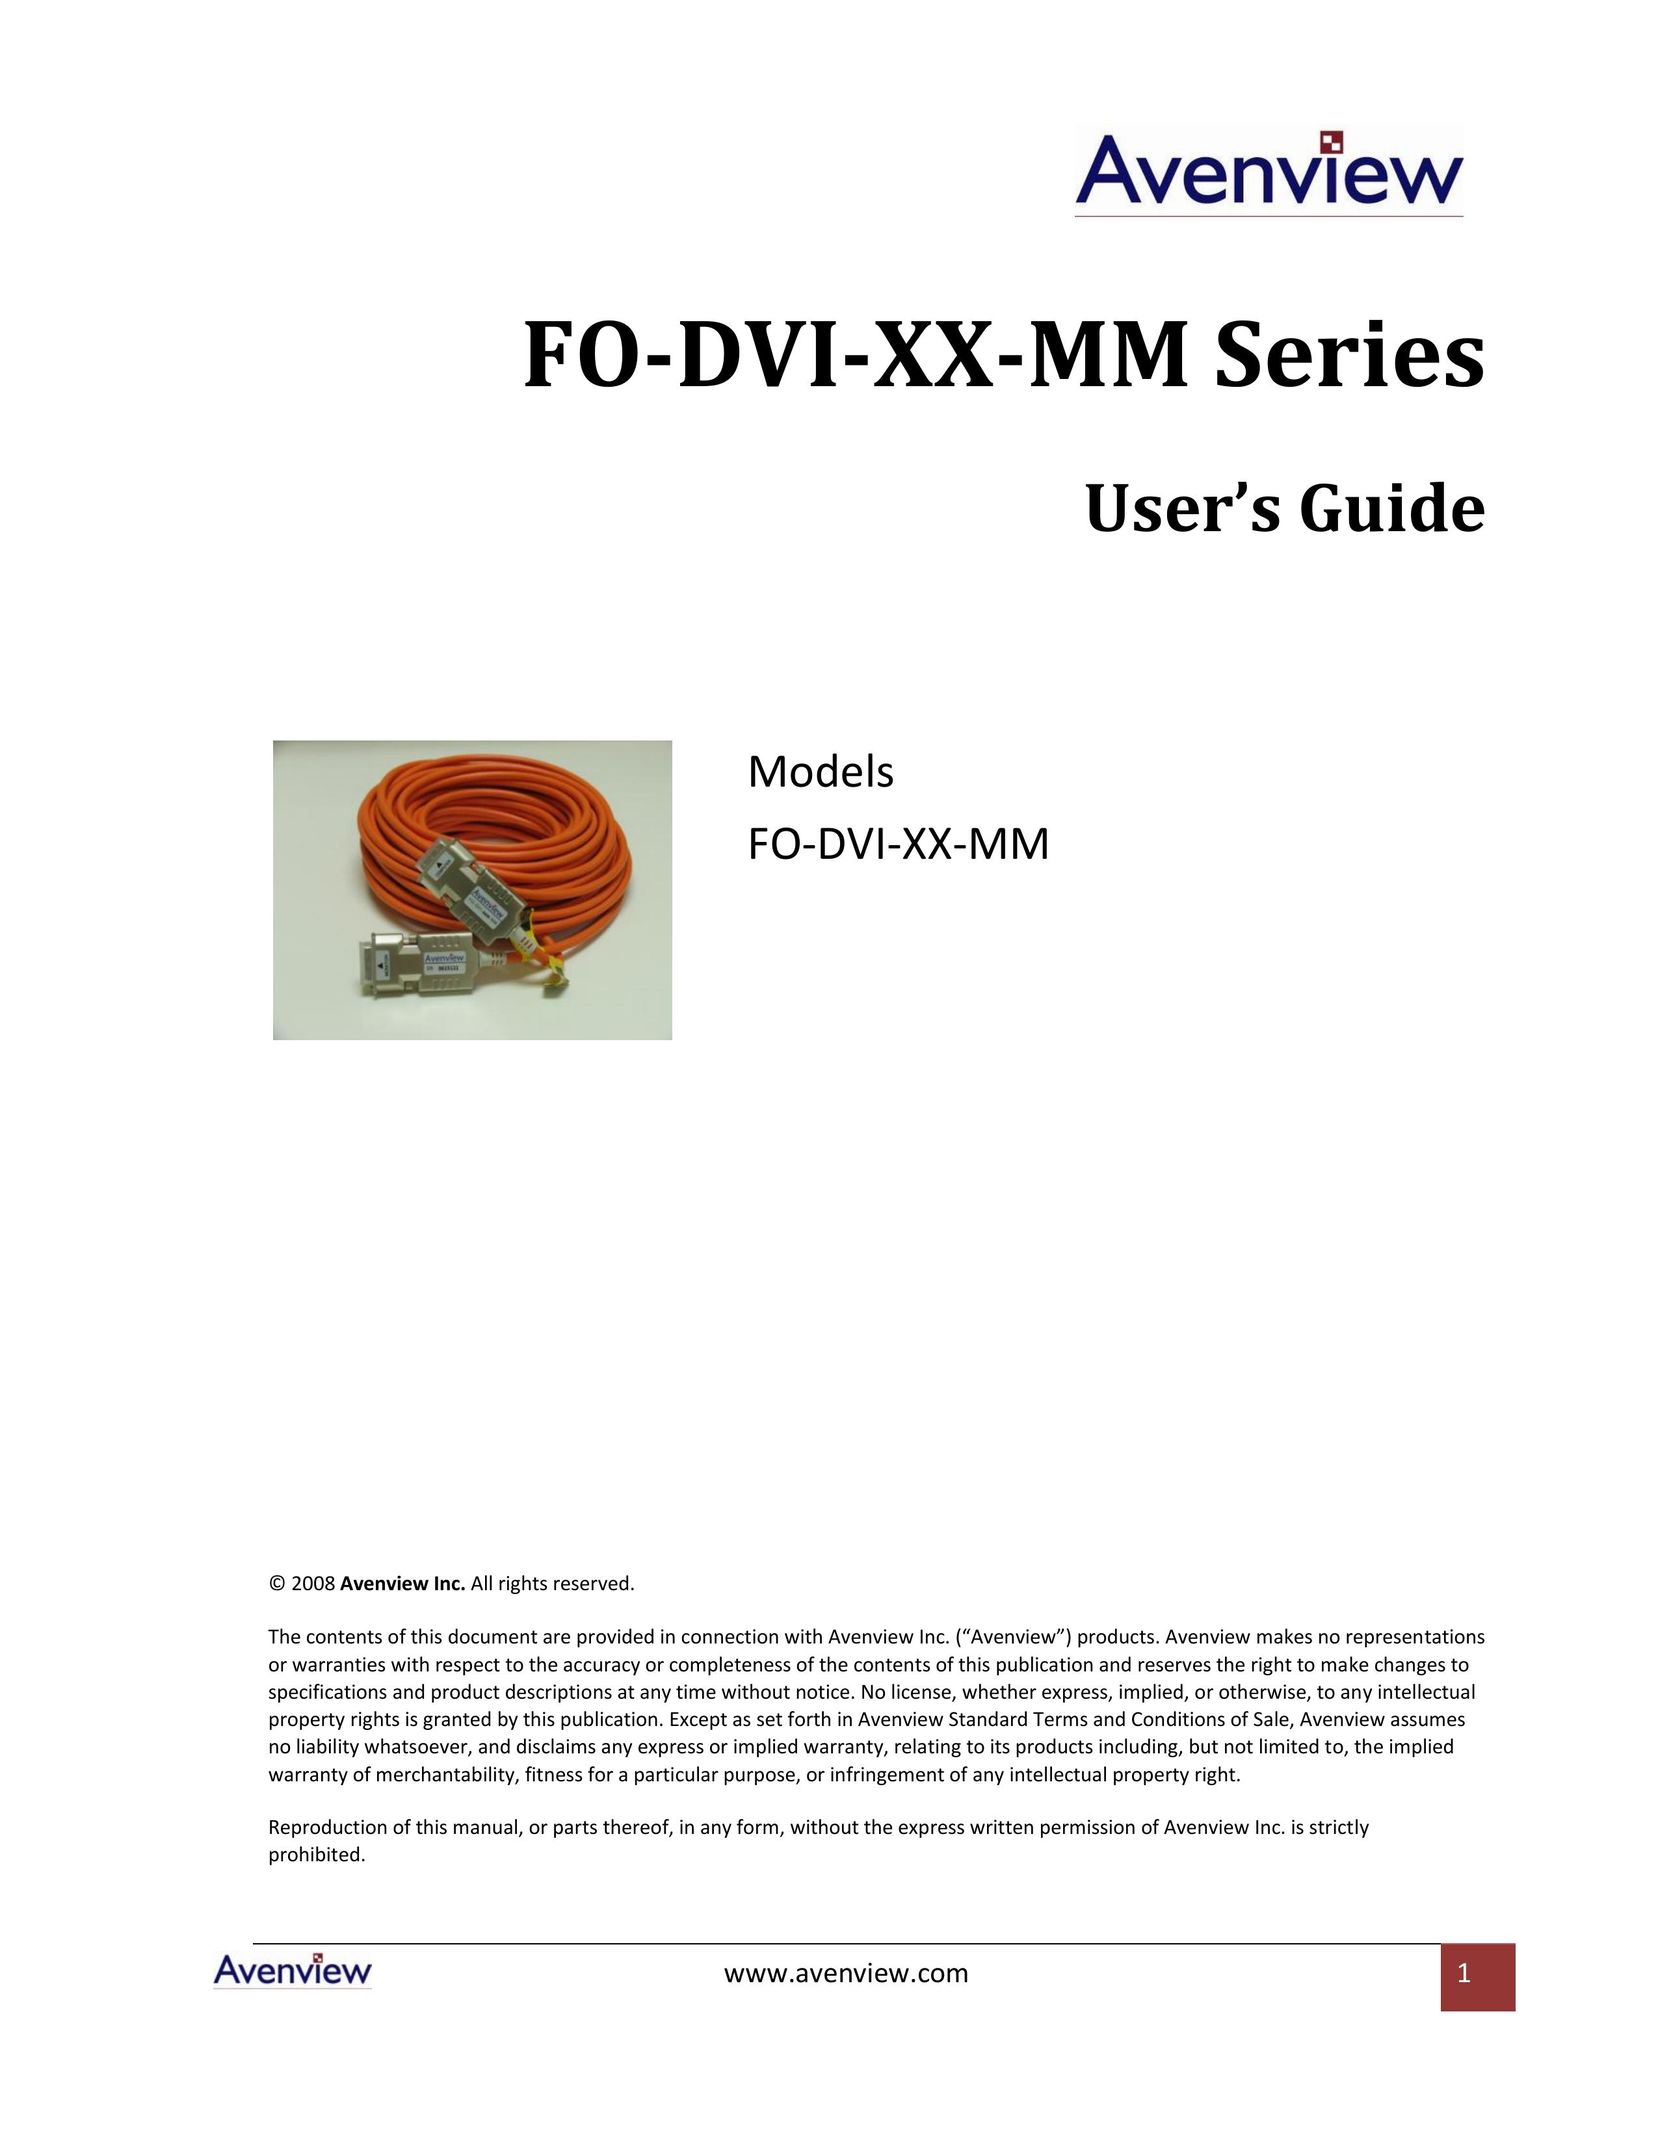 Avenview FO-DVI-XX-MM Network Router User Manual